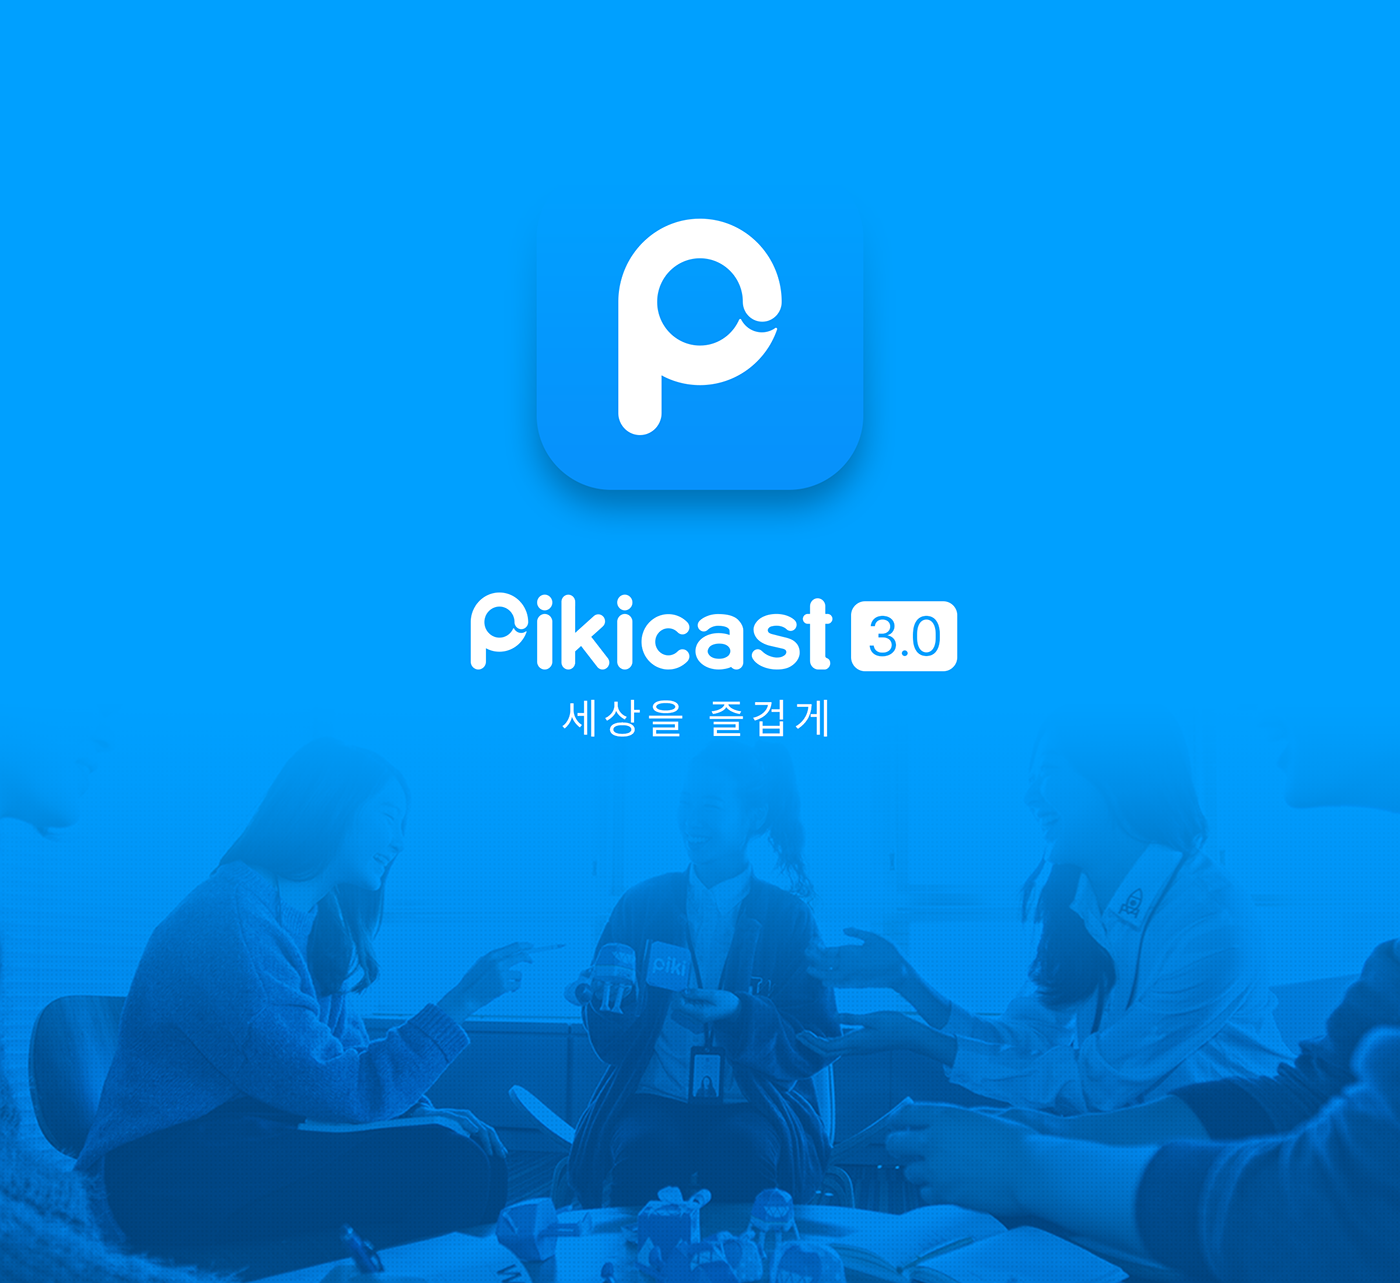 pikicast 피키캐스트 mobile application ios android